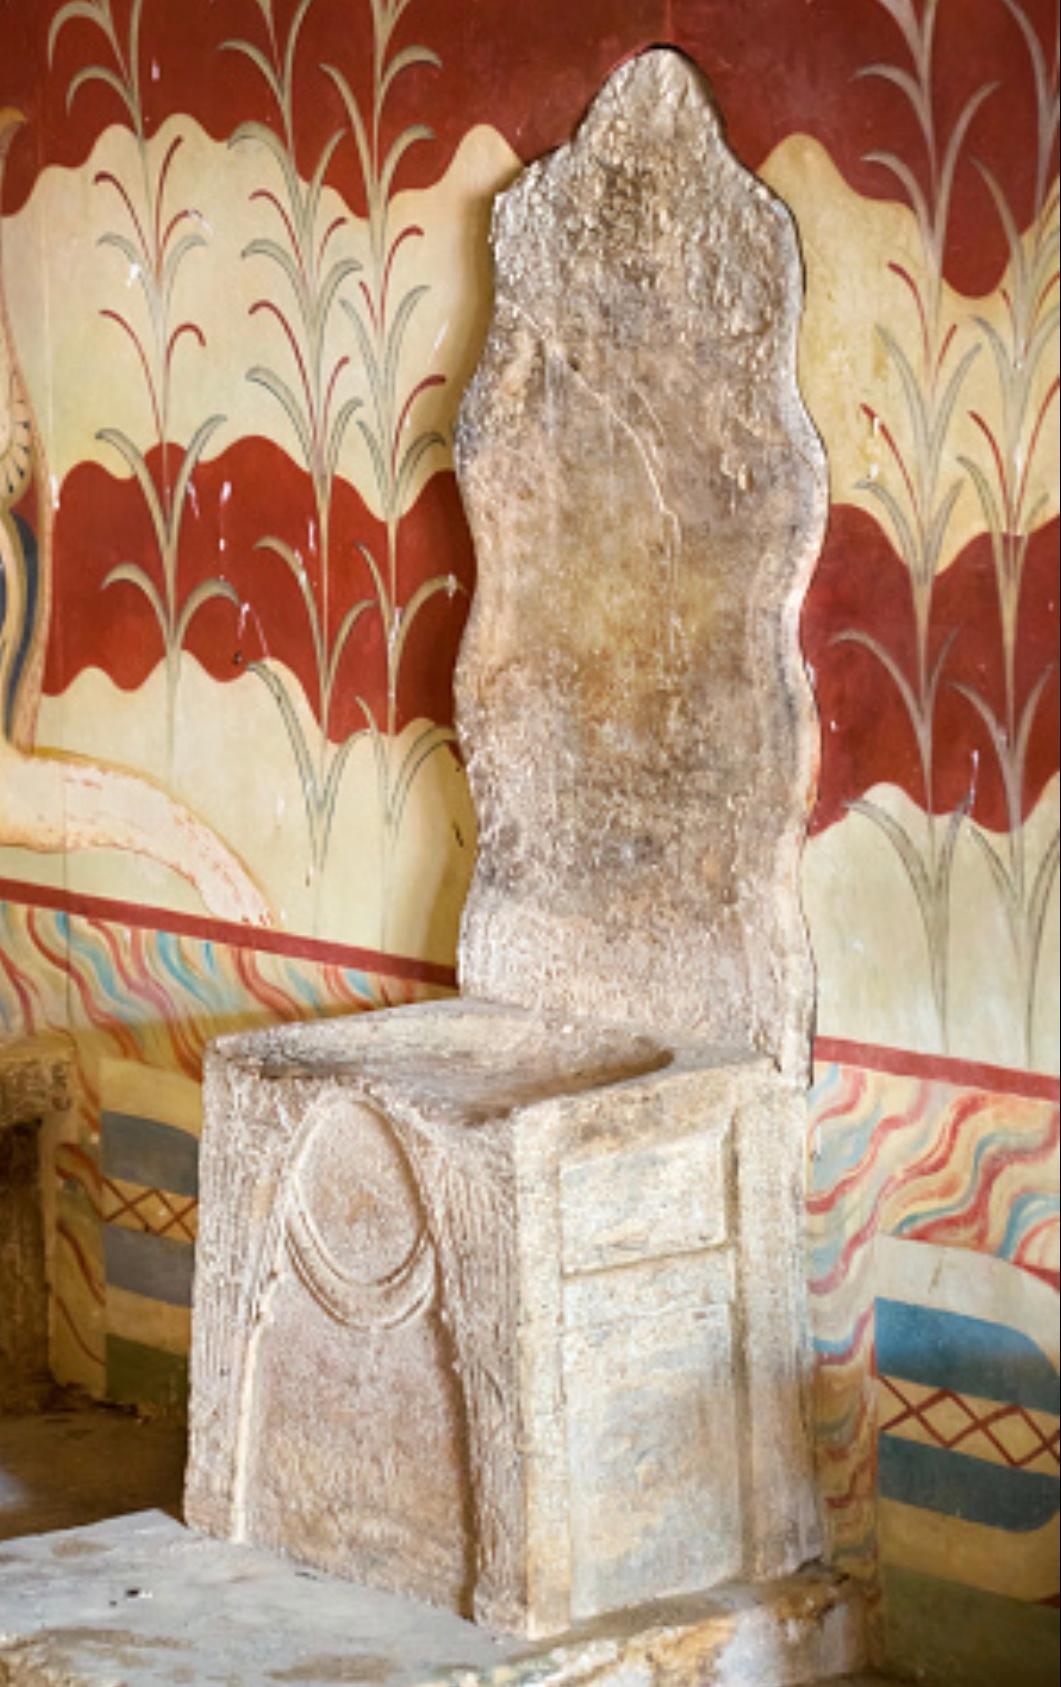 Rare wooden replica of the “King Minos Throne” from the Palace at Knossos 4